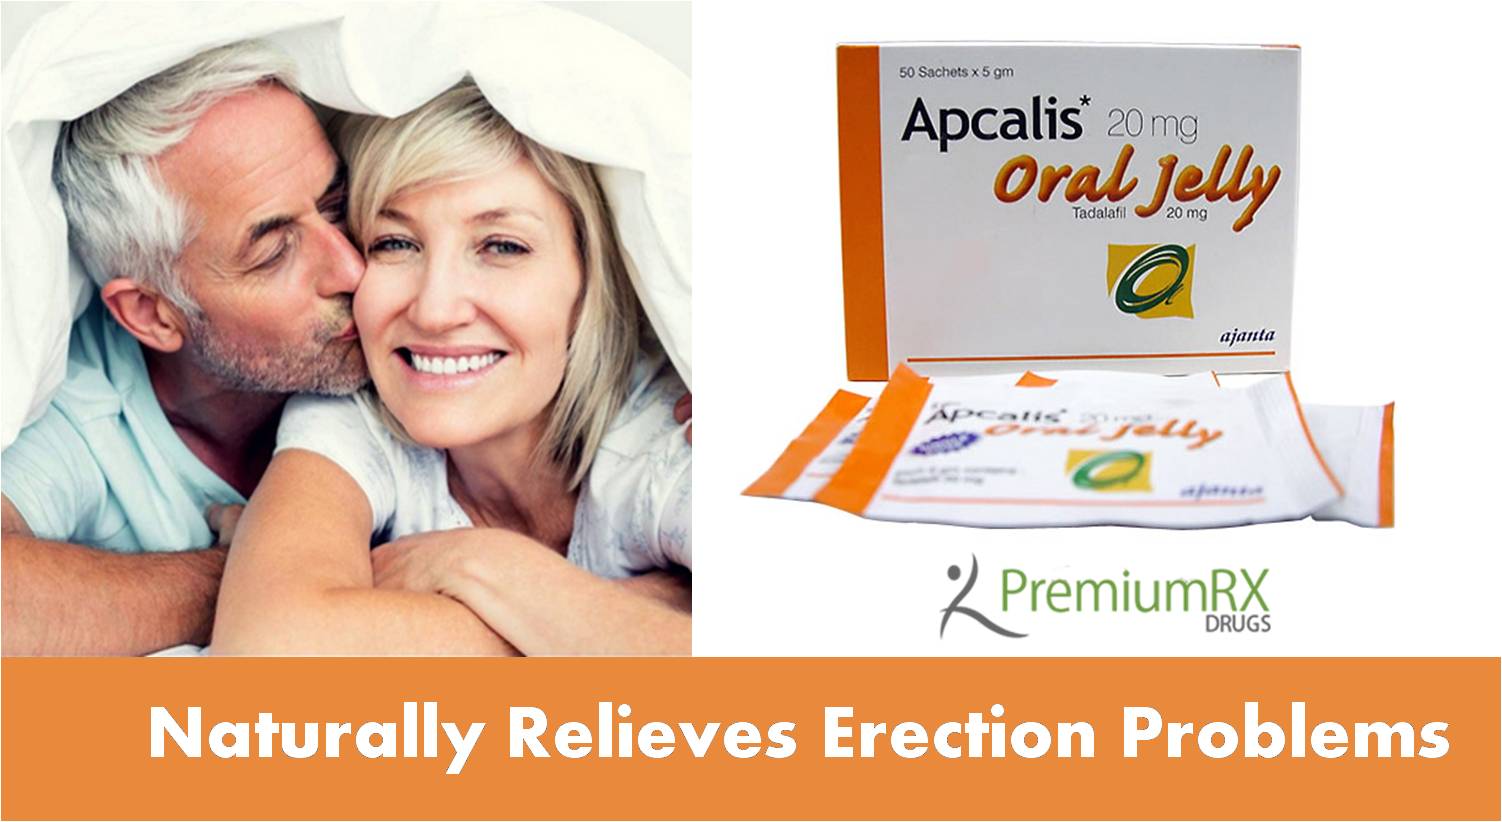 How to Use Apcalis Oral Jelly